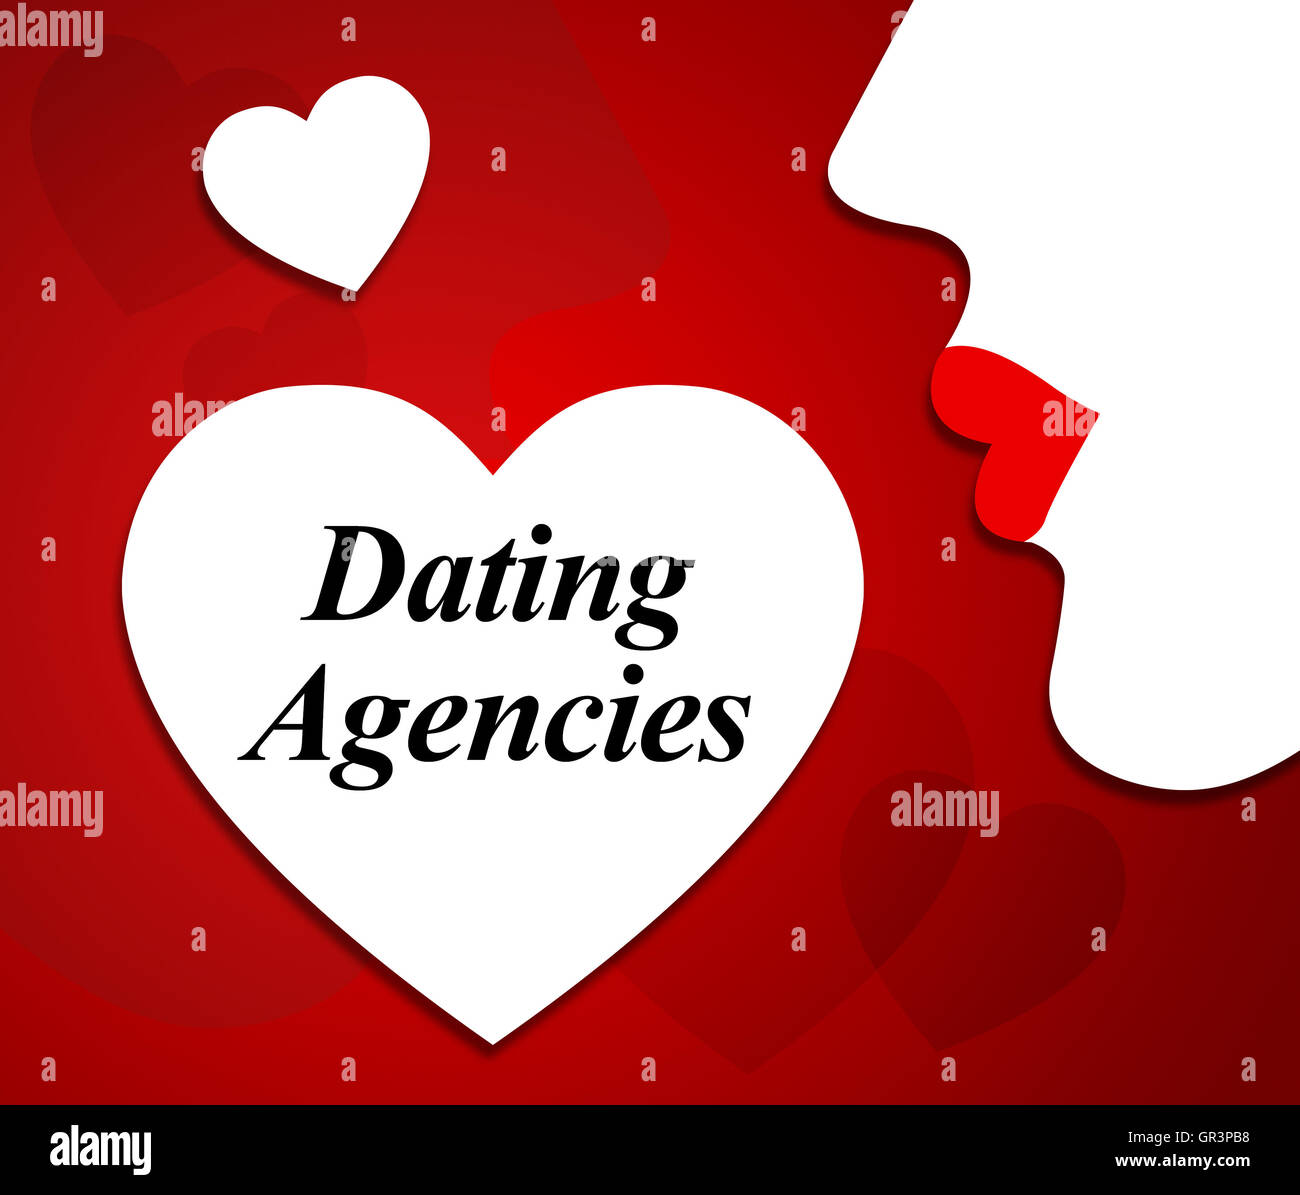 Dating Agencies Indicating Romance Net And Agent Stock Photo